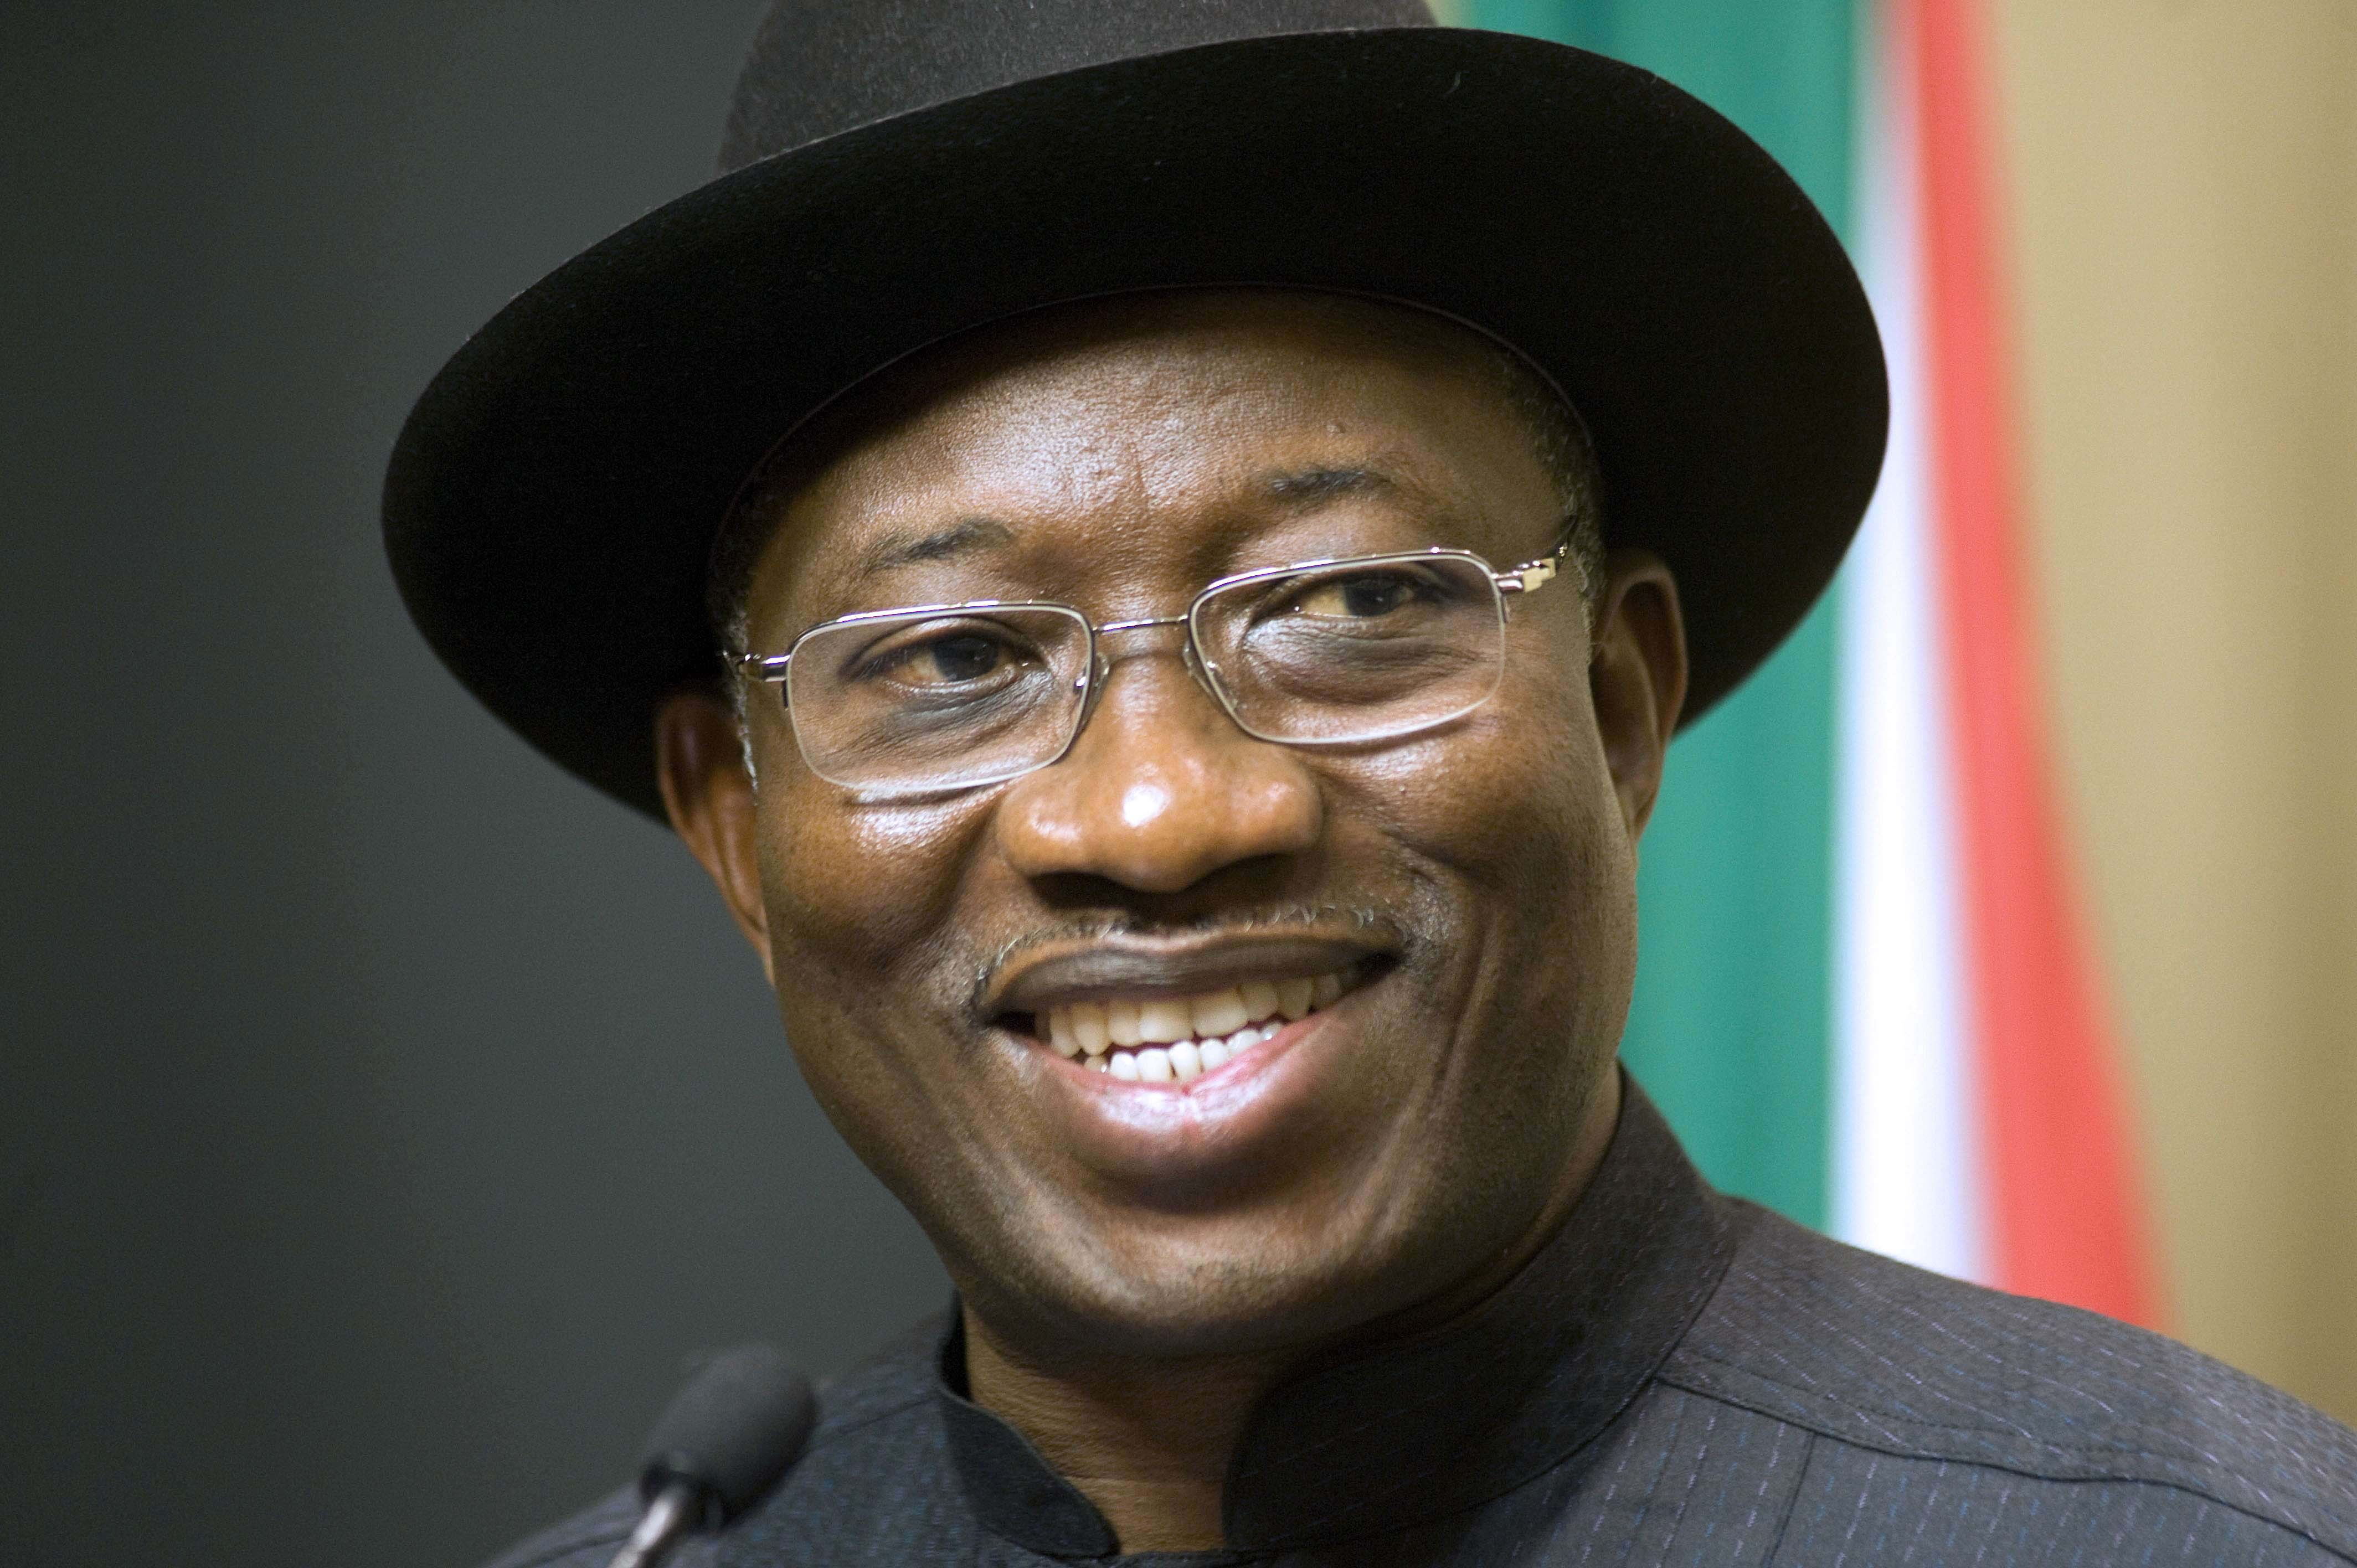 Nigerian President Goodluck Jonathan smiles during a press conference at the South African Parliament in Cape Town, on May 7, 2013. The leaders of Africa's two biggest economies, South Africa and Nigeria, pledged closer ties on Tuesday in what was hailed as a milestone in a sometime patchy relationship. President Jacob Zuma rolled out a red carpet for his counterpart Goodluck Jonathan as ministers signed nine sectoral pacts covering oil and gas, power, defence and communication. Nigeria News PHOTO / RODGER BOSCH